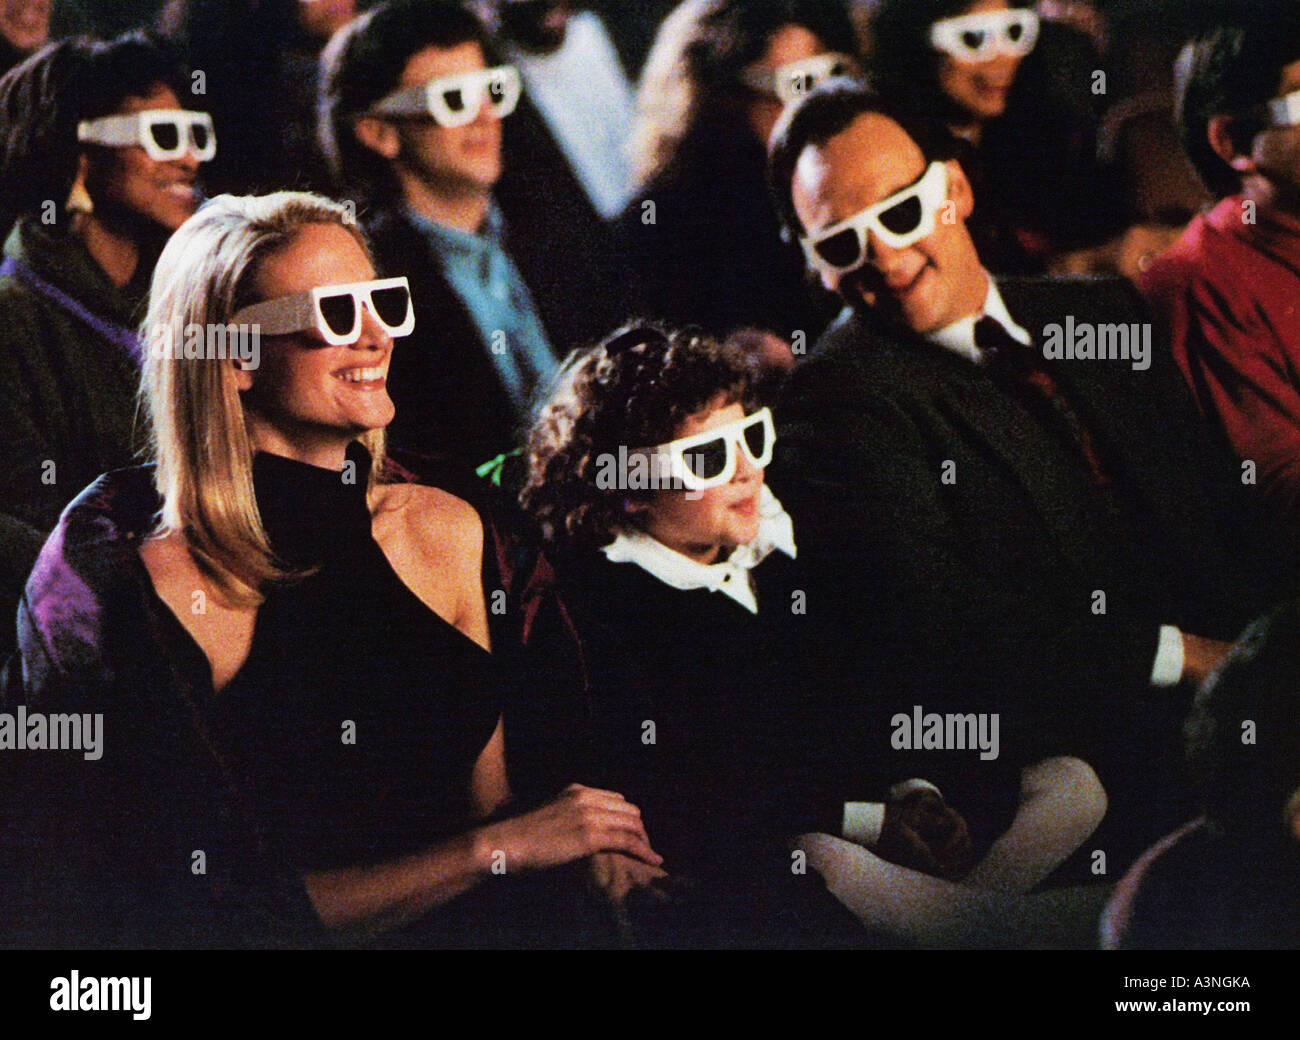 CURLEY SUE  James Belushi and Kelly Lynch with Alsan Porter centre in the 1991 Columbia film Stock Photo